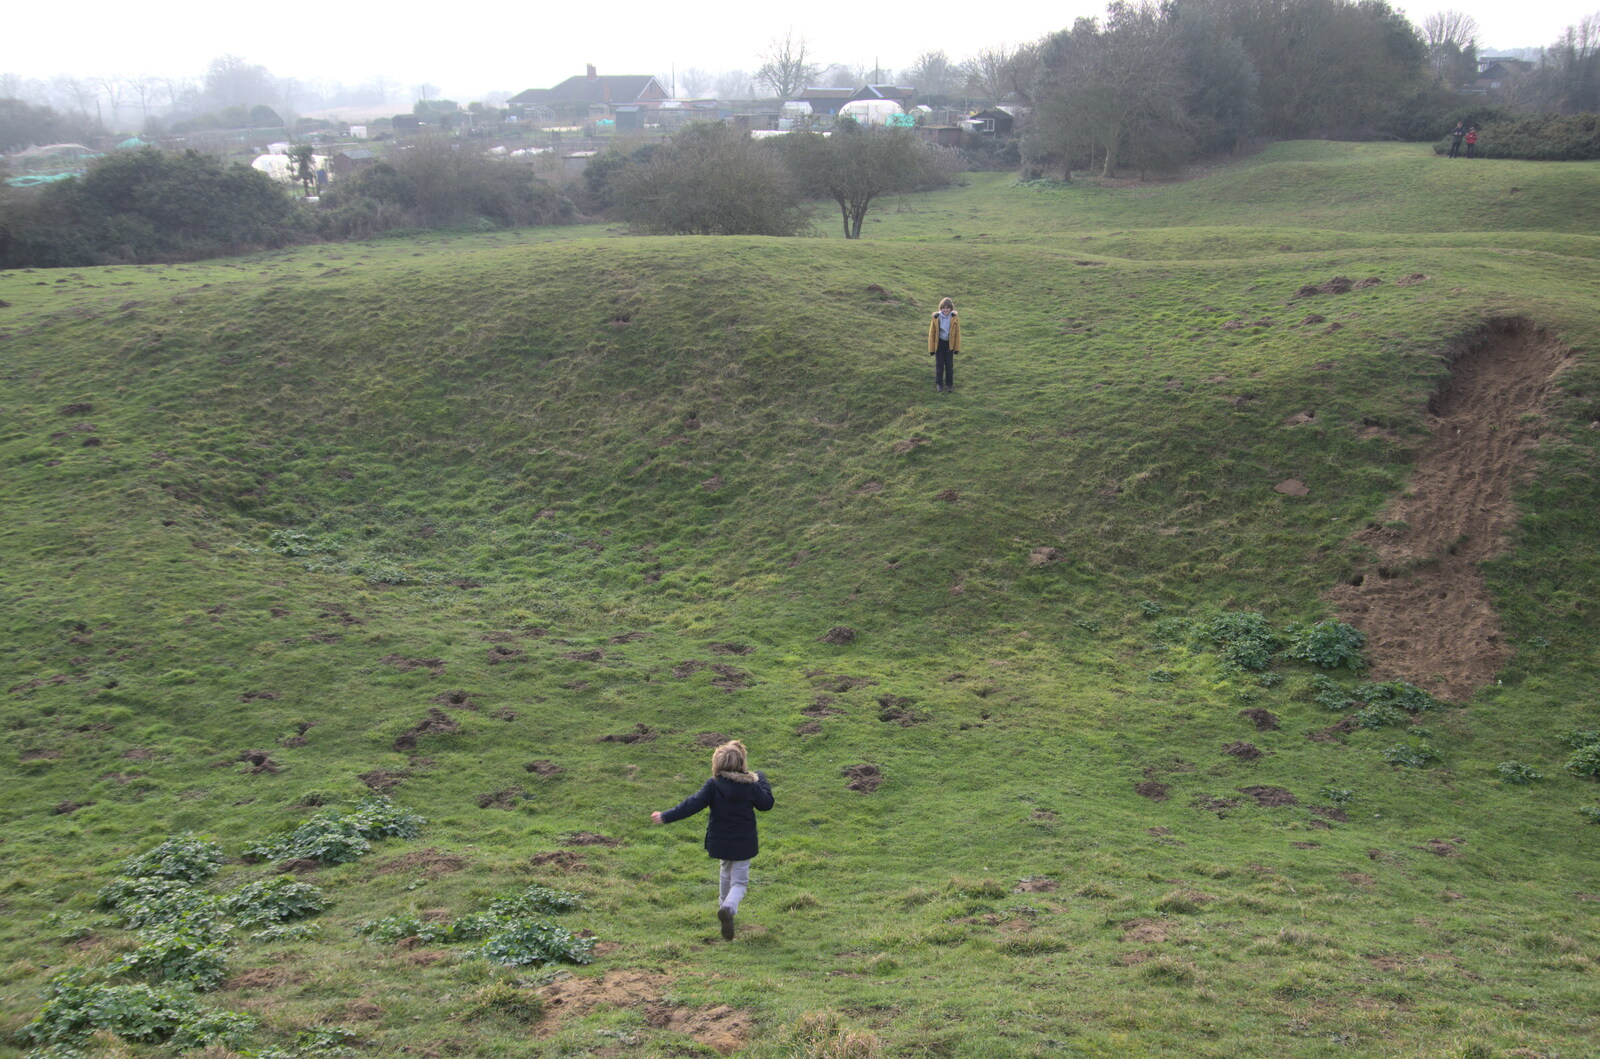 A Trip to Orford, Suffolk - 25th January 2020: Running up that hill